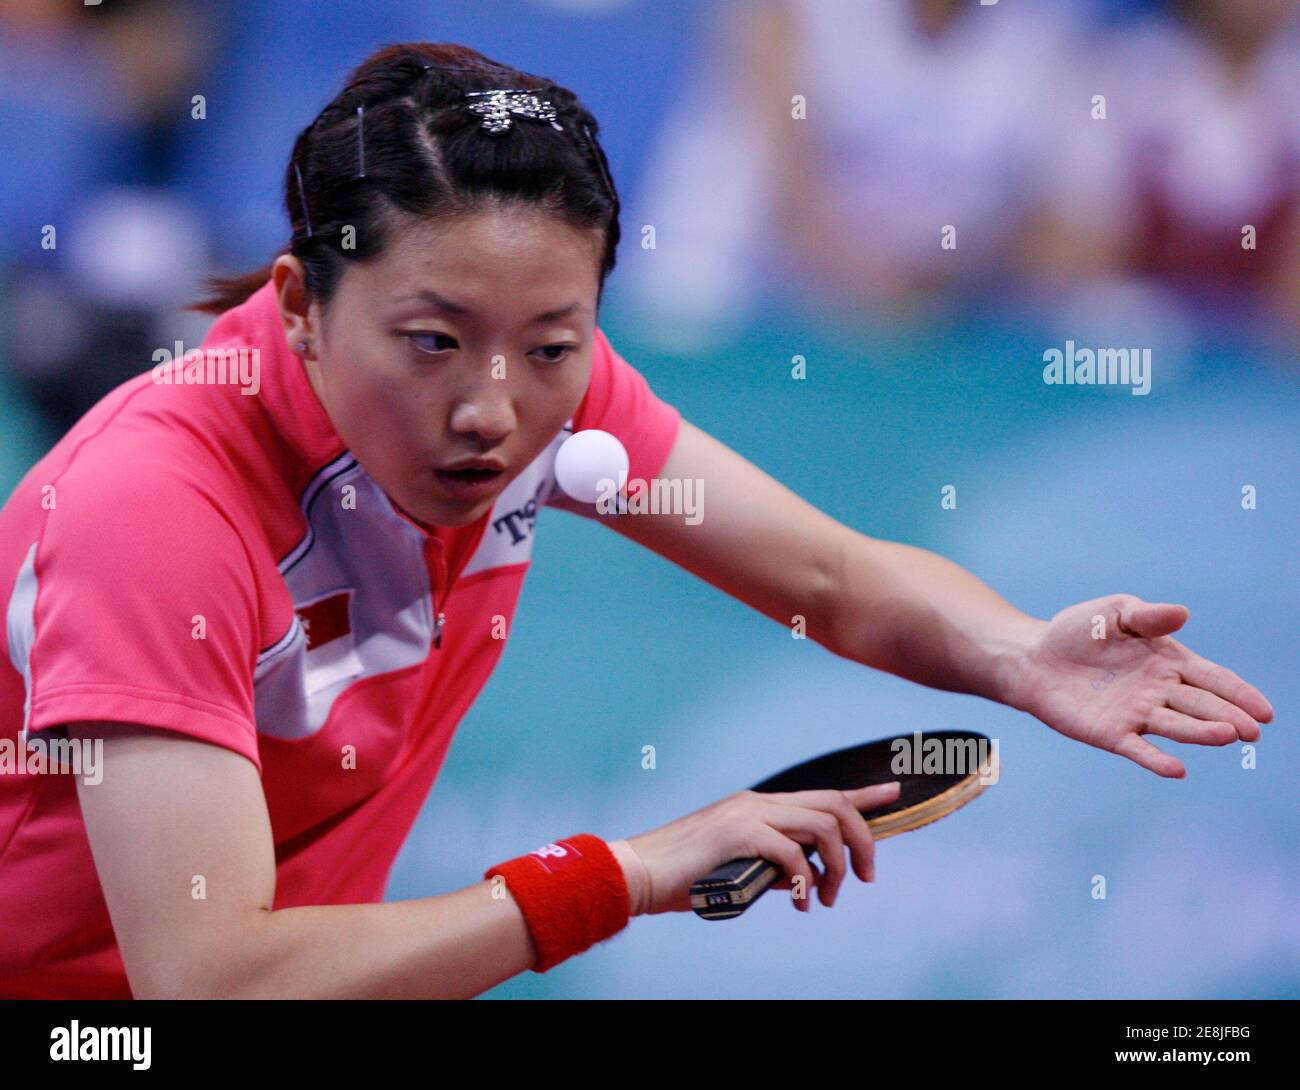 Li Jia Wei of Singapore serves to Tamara Boros of Croatia during her women's singles third round table tennis match against at the Beijing 2008 Olympic Games August 20, 2008     REUTERS/Beawiharta (CHINA) Stock Photo